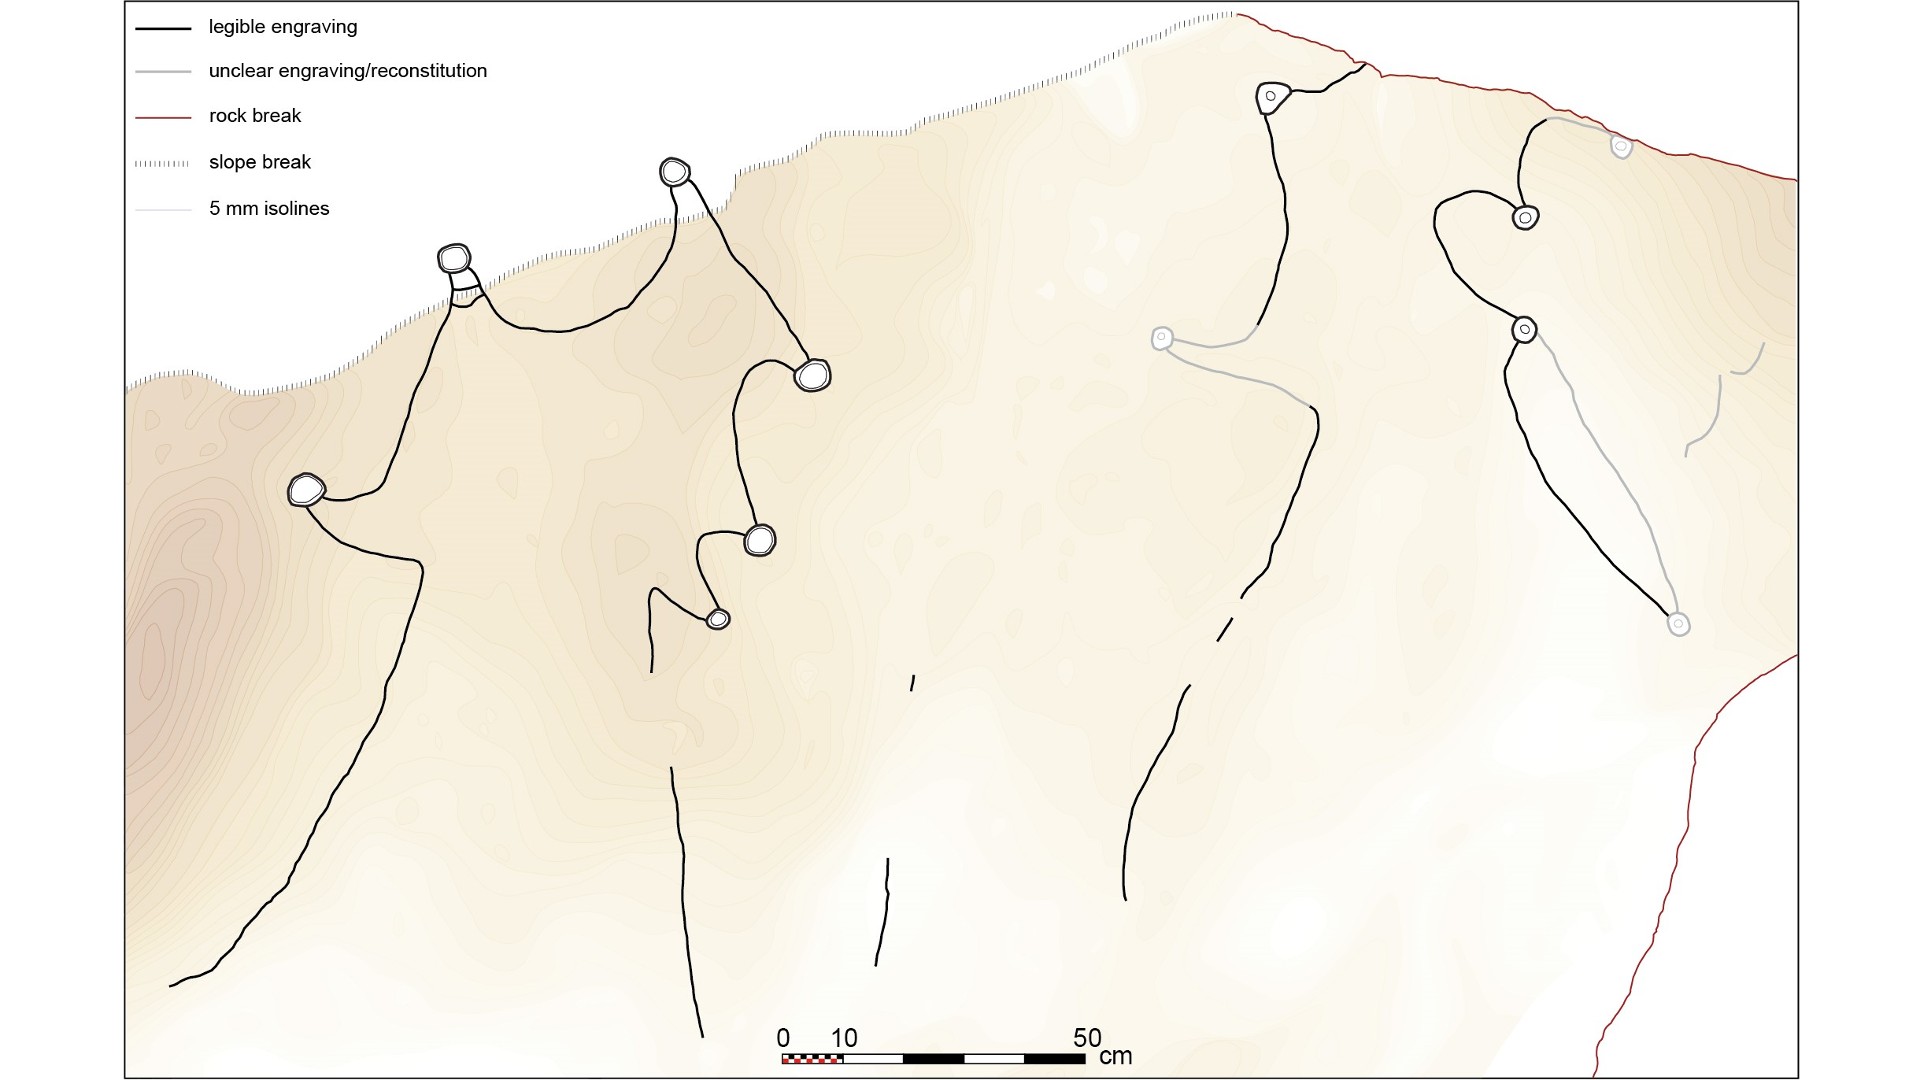 8,000-year-old rock carvings in Arabia may be the world's oldest megastructure blueprints 4